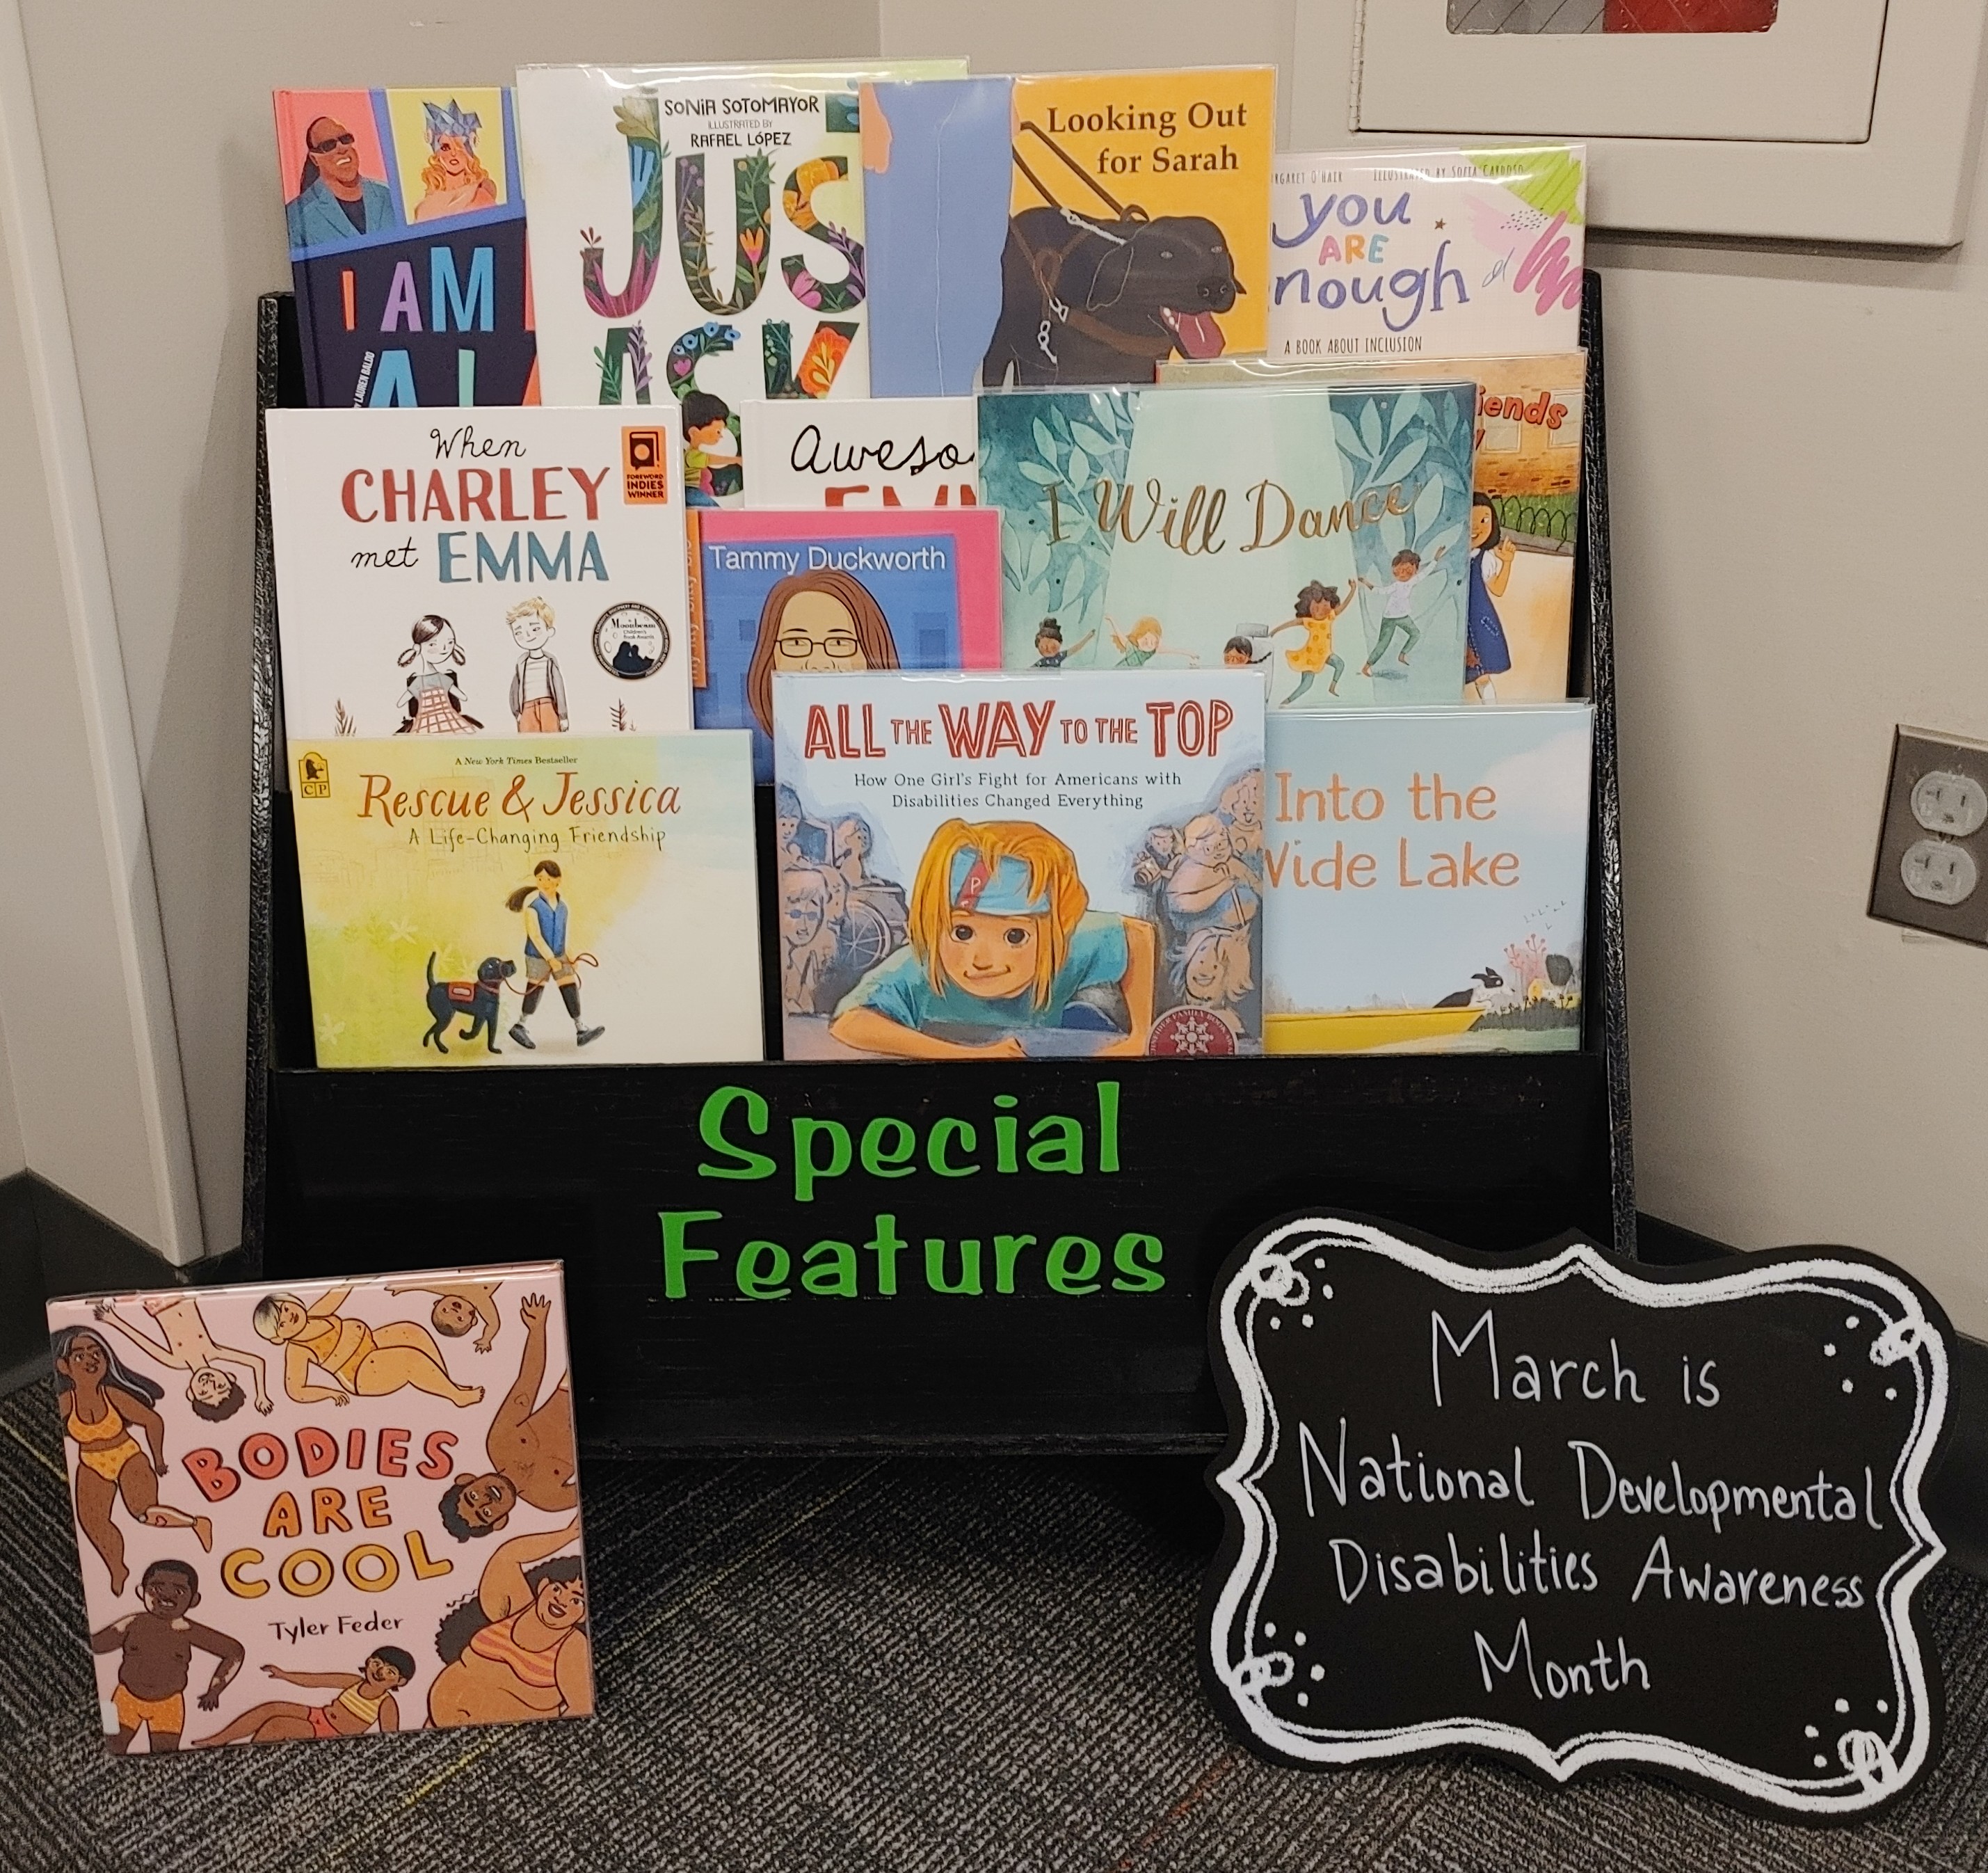 Special Feature display at the library